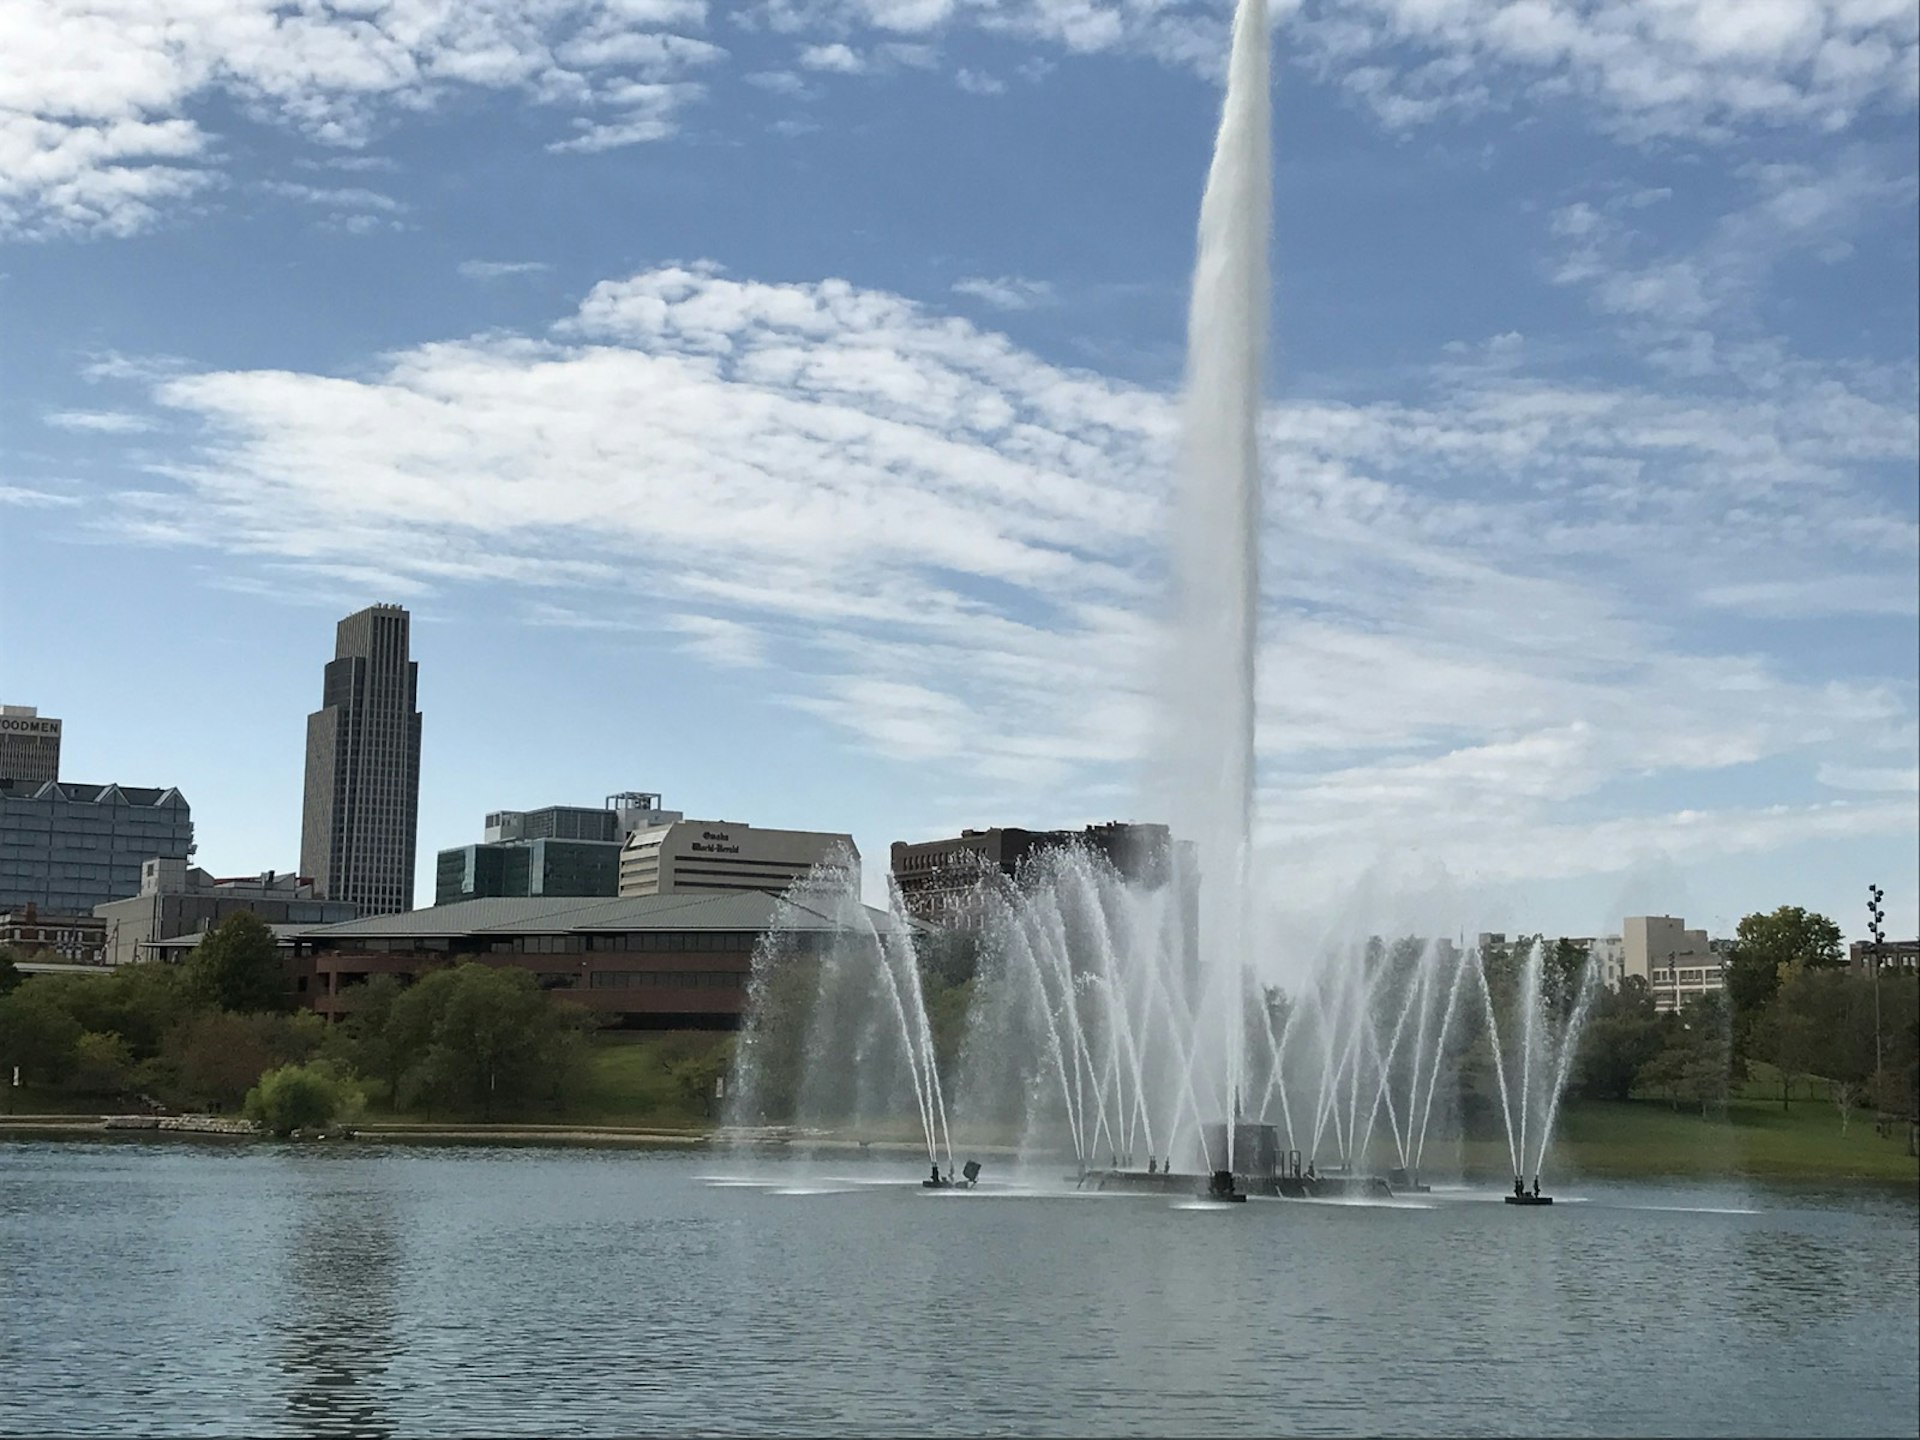 A large fountain dances in the middle of a lake with the Omaha skyline rising in the background